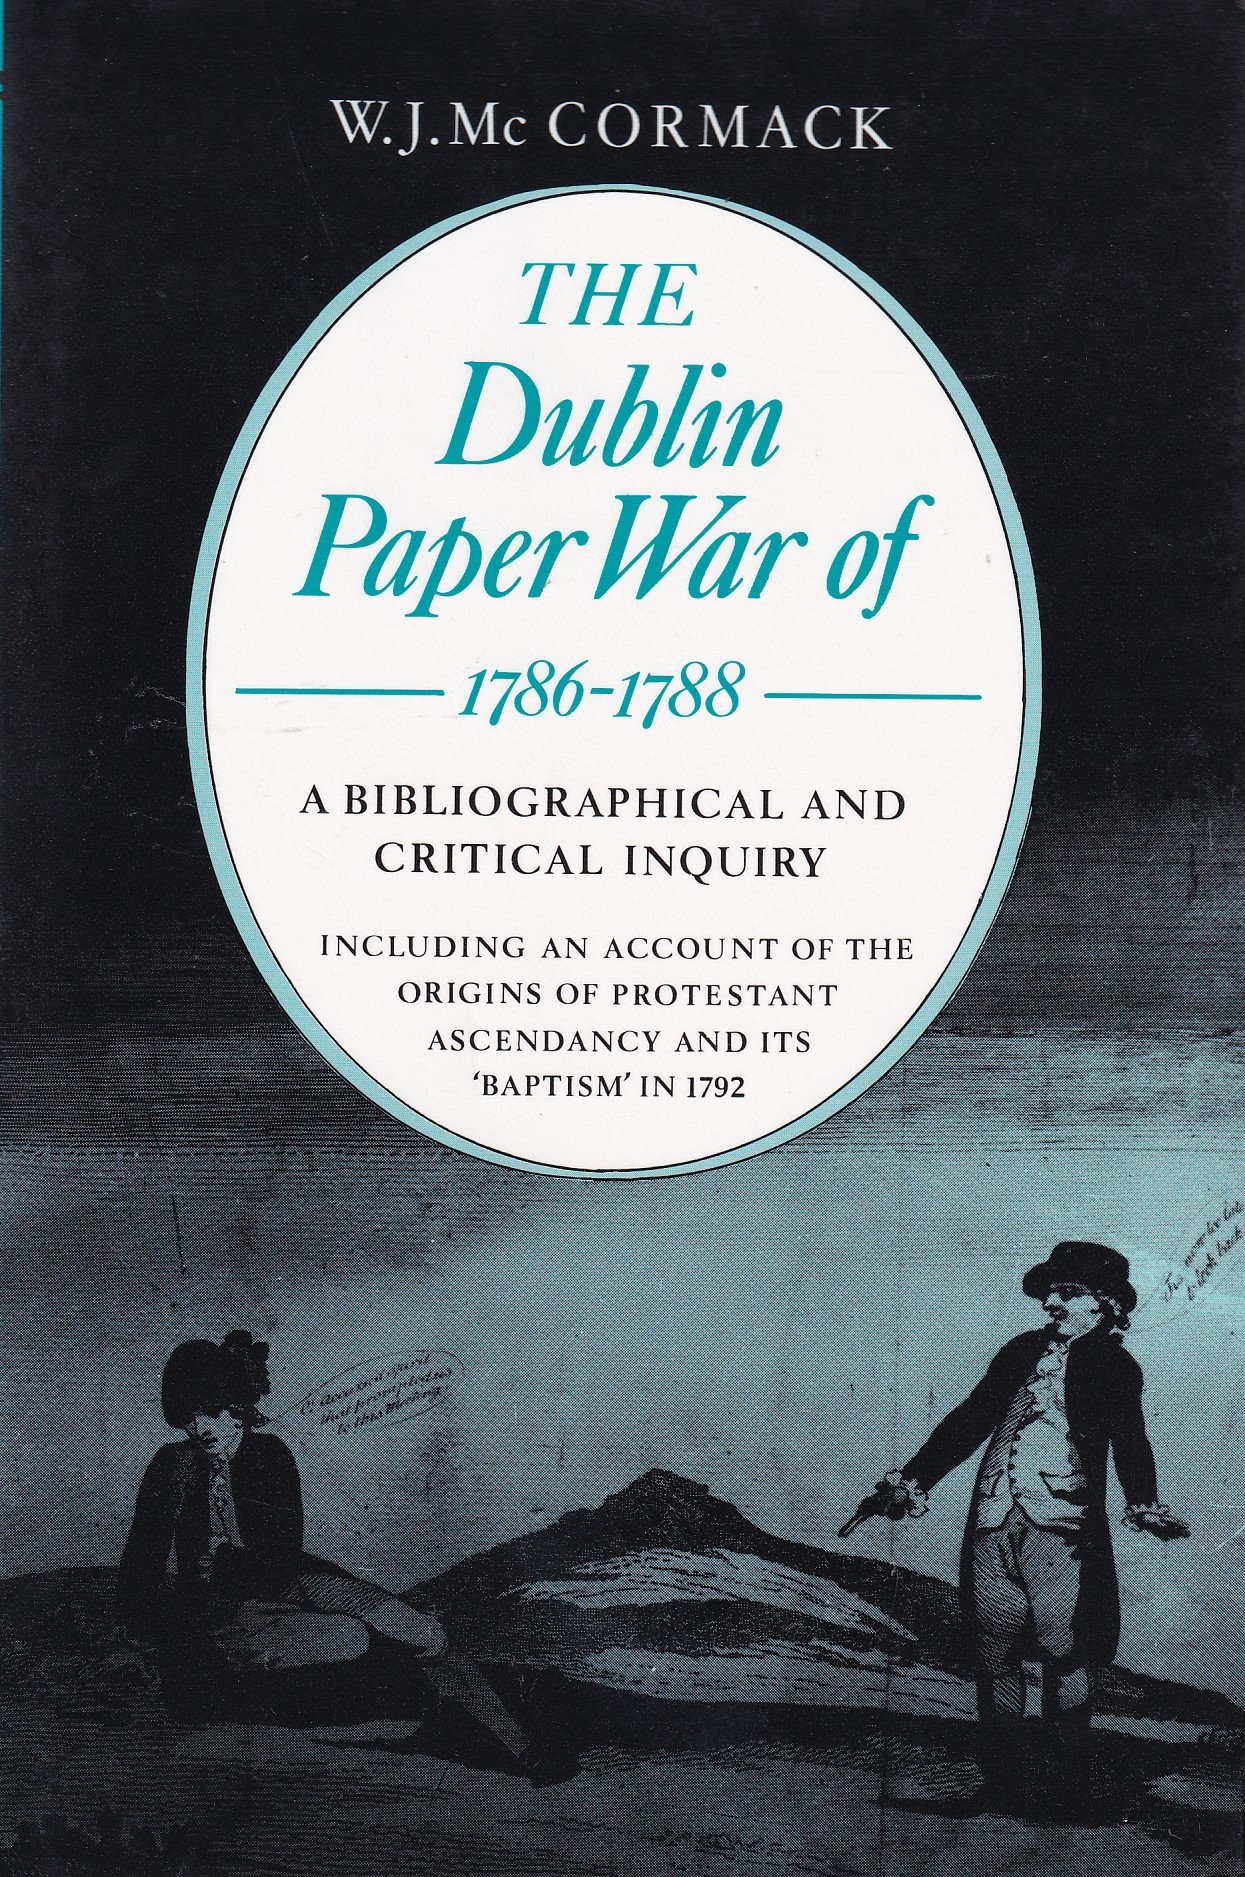 The Dublin Paper War of 1786-1788: A Bibliographical and Critical Inquiry by W. J. Mc Cormack